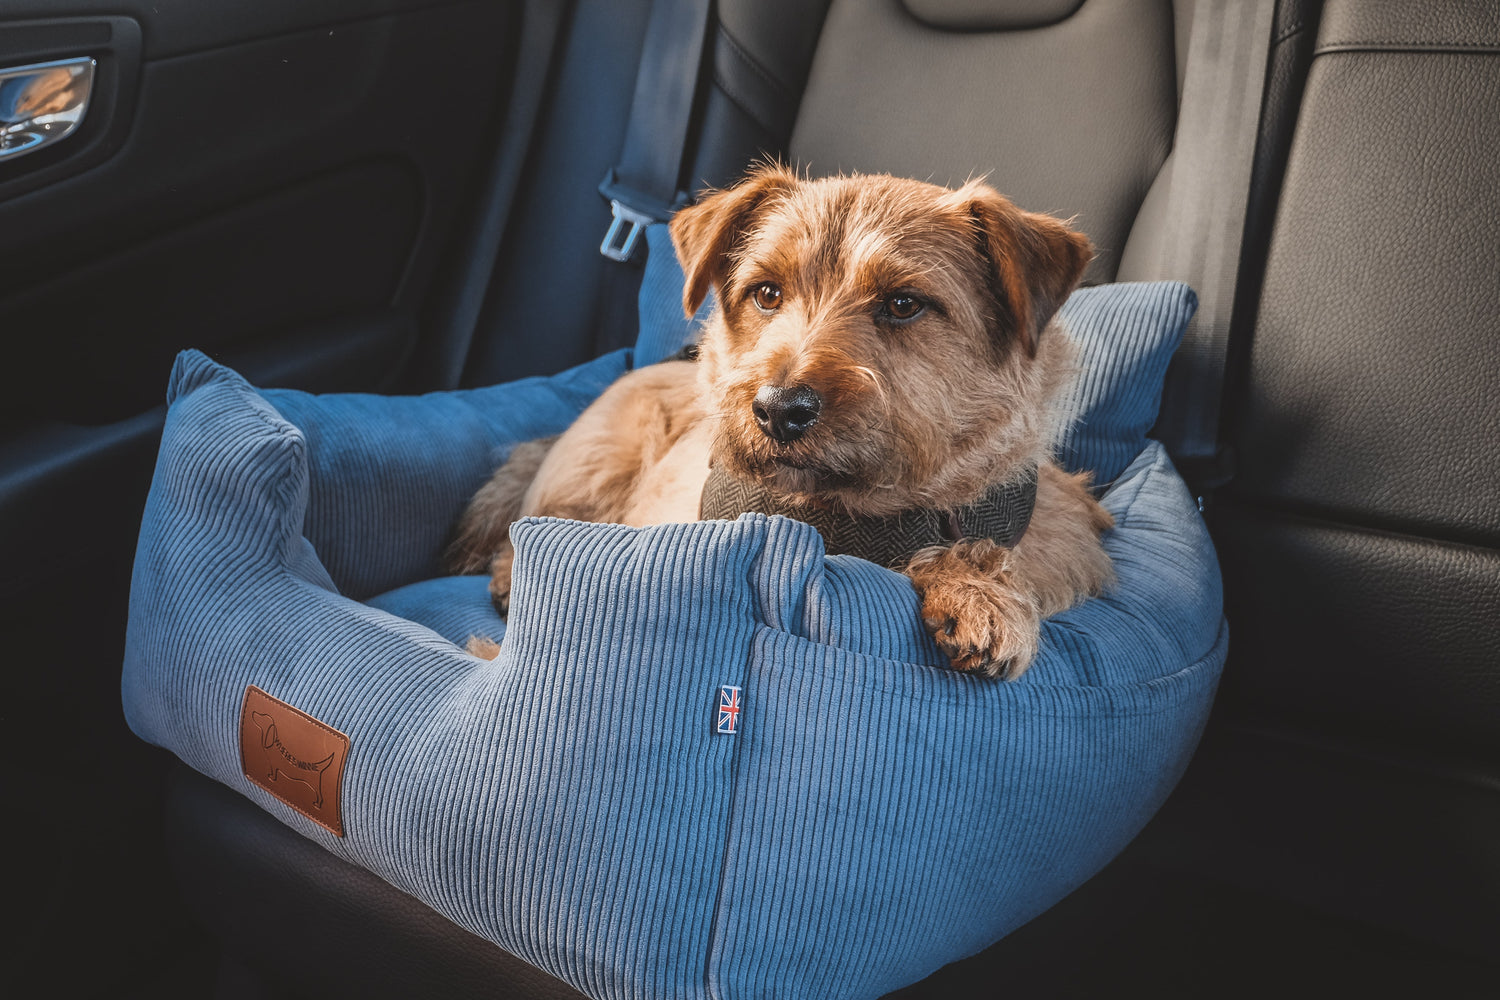 Medium sized dog secured in a comfortable and safe, blue dog car seat 